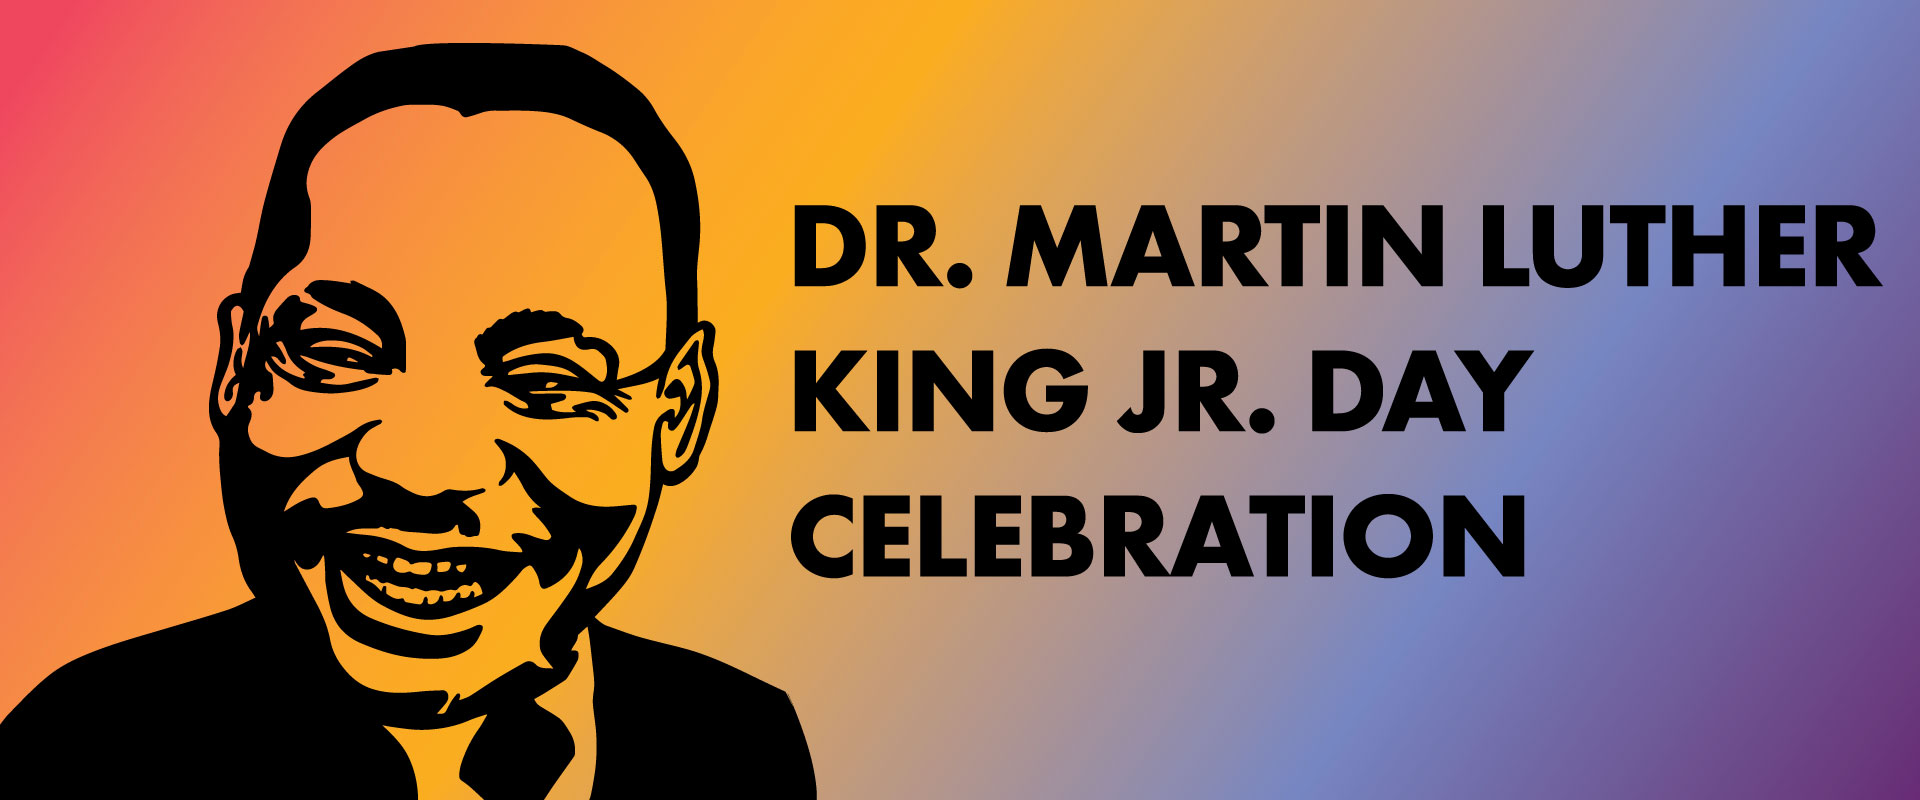 Dr. Martin Luther King Jr. Day Celebration: silhouette of MLK smiling over colored gradient